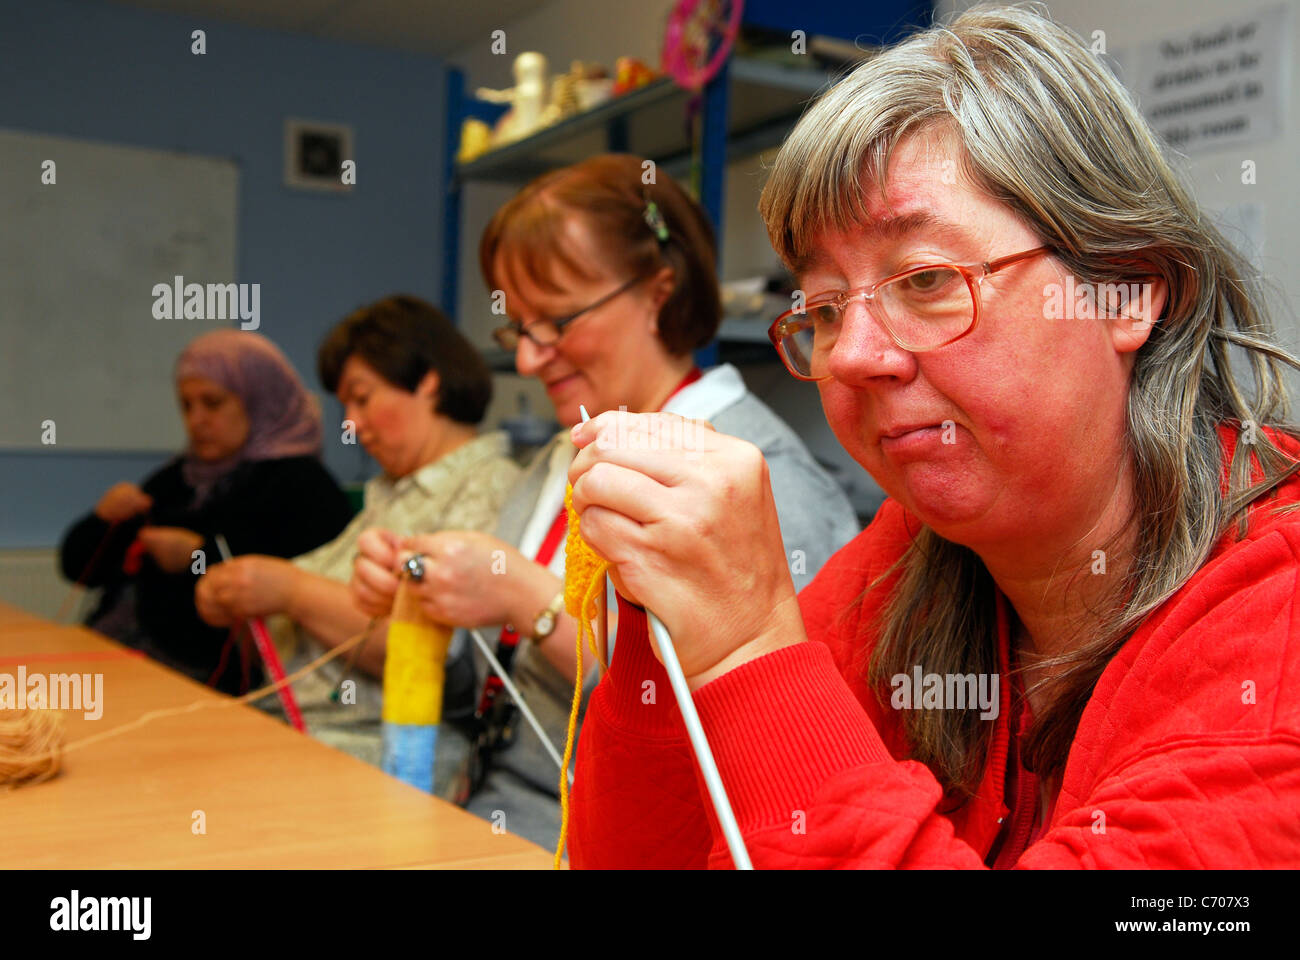 Women taking part in a knitting class for people with physical and learning difficulties, Grimsby, Lincolnshire, UK. Stock Photo